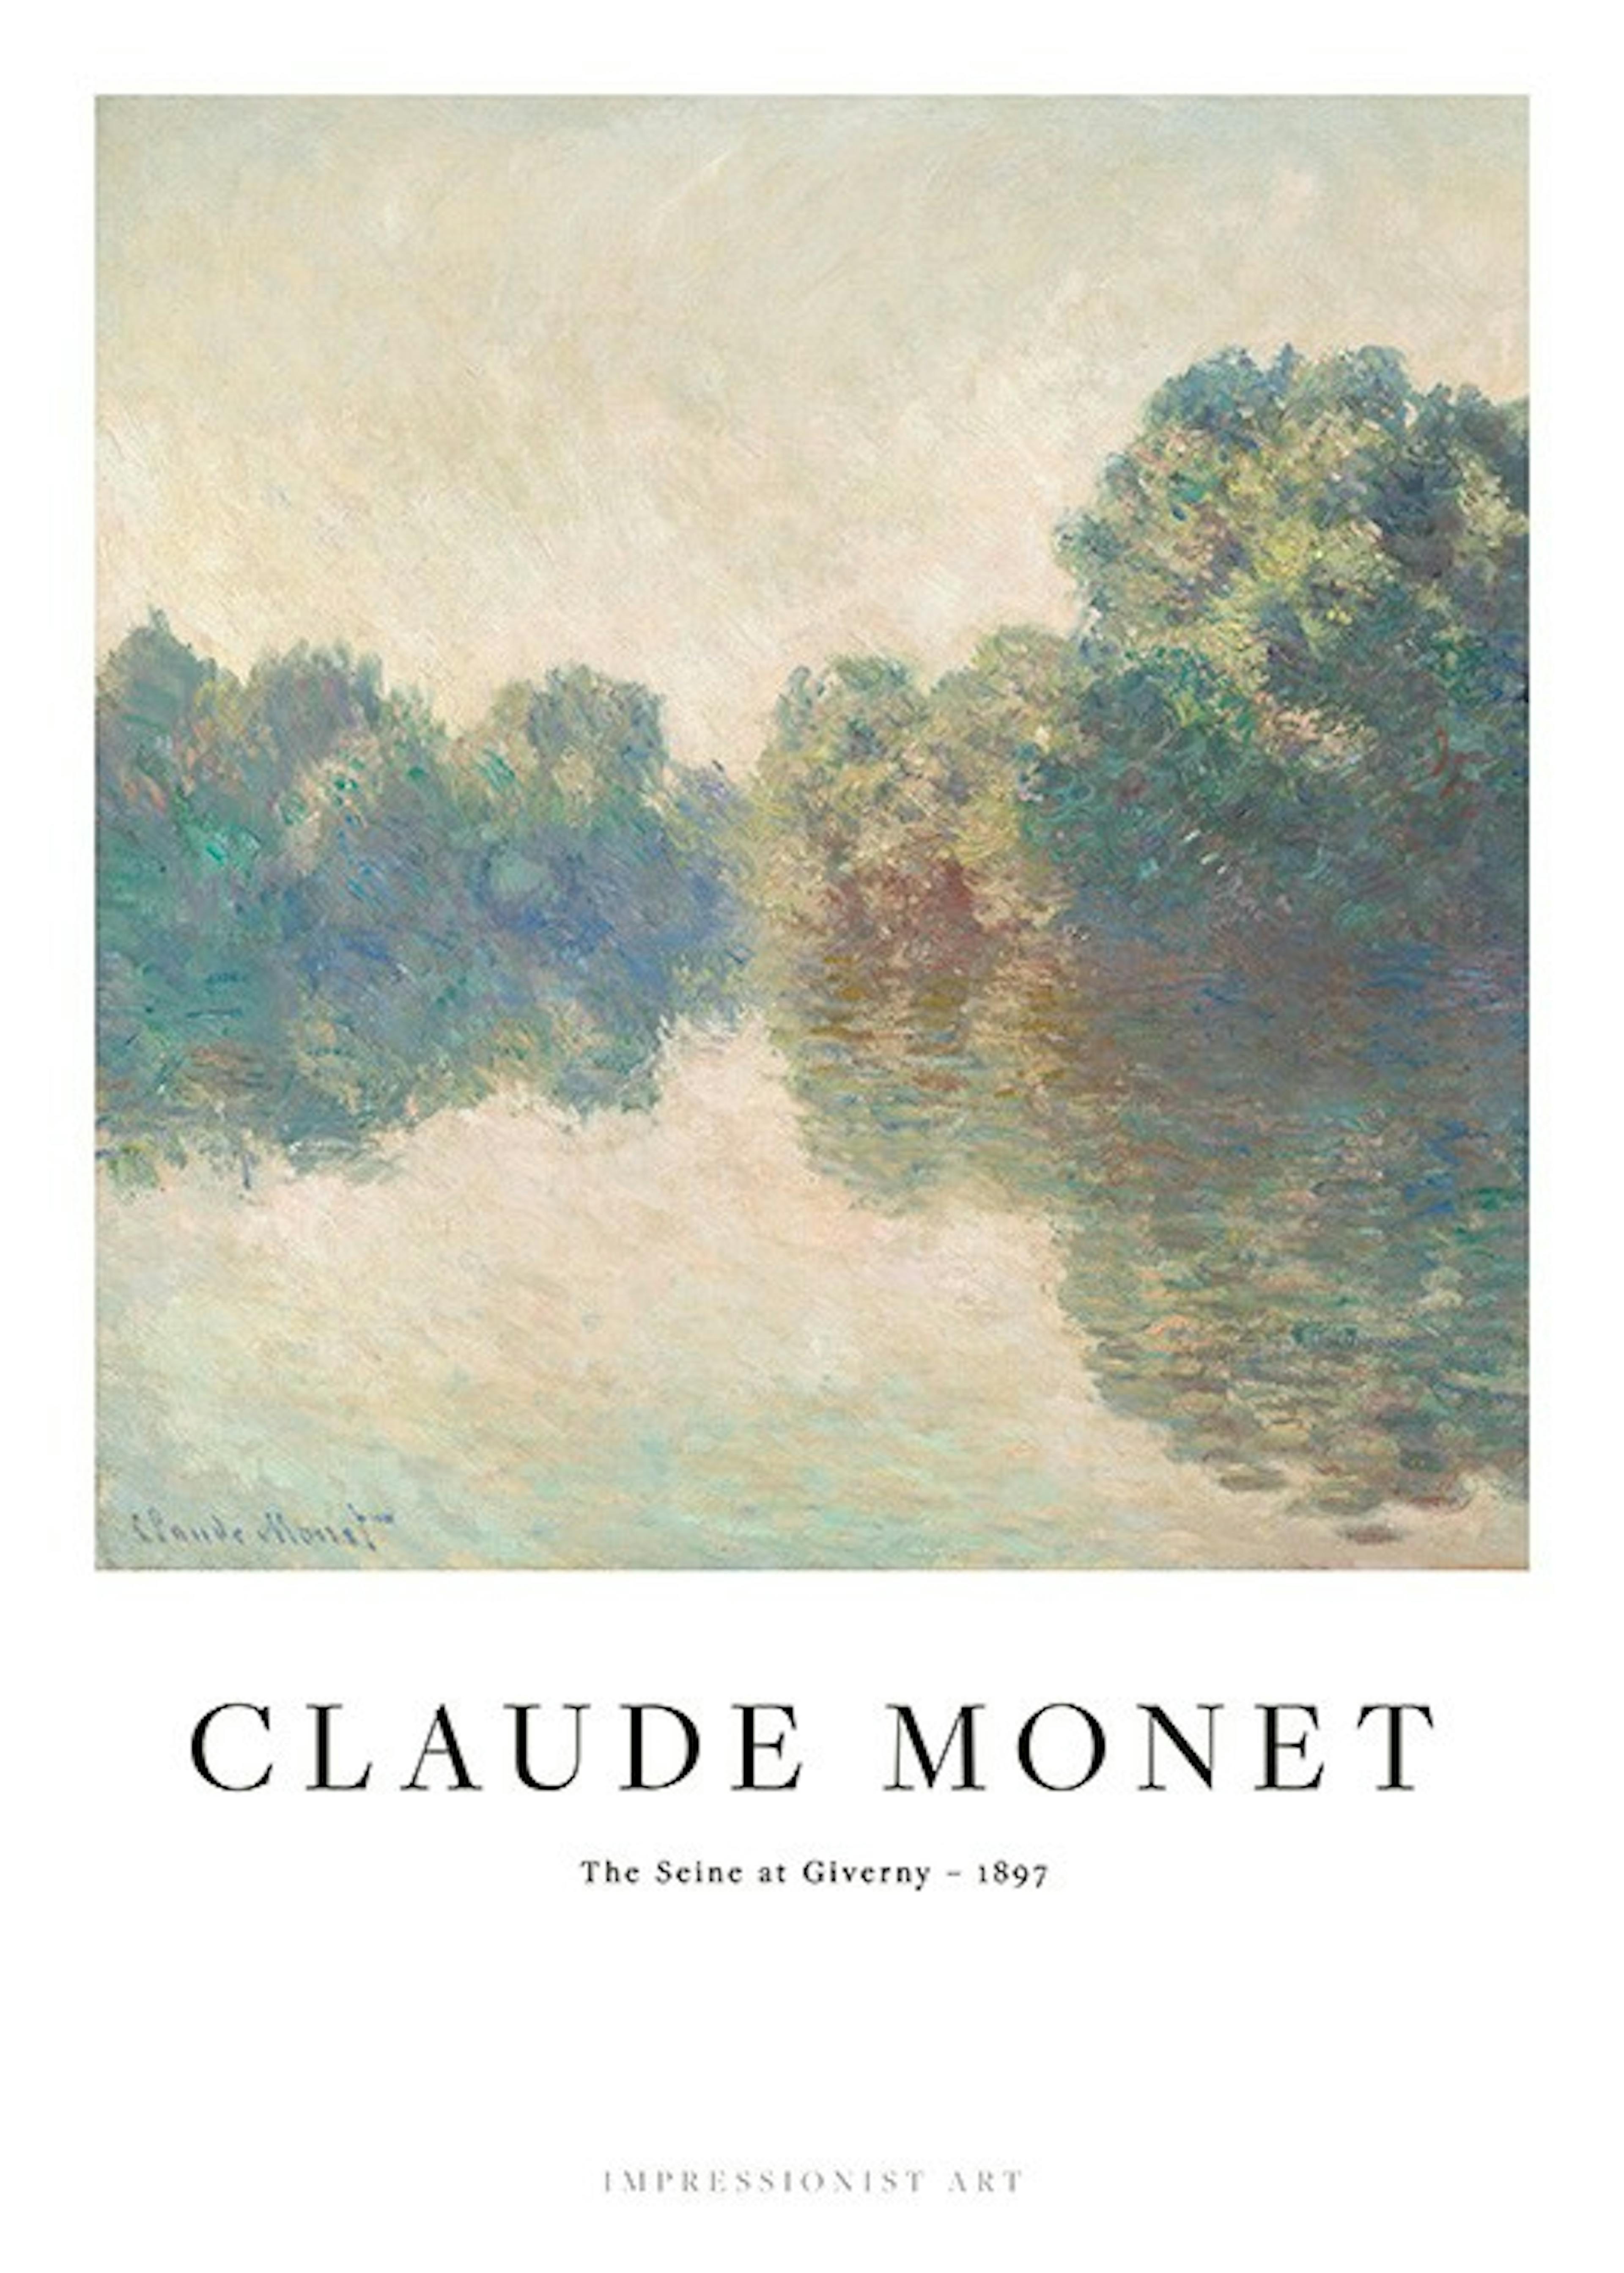 Monet - The Seine at Giverny Juliste 0